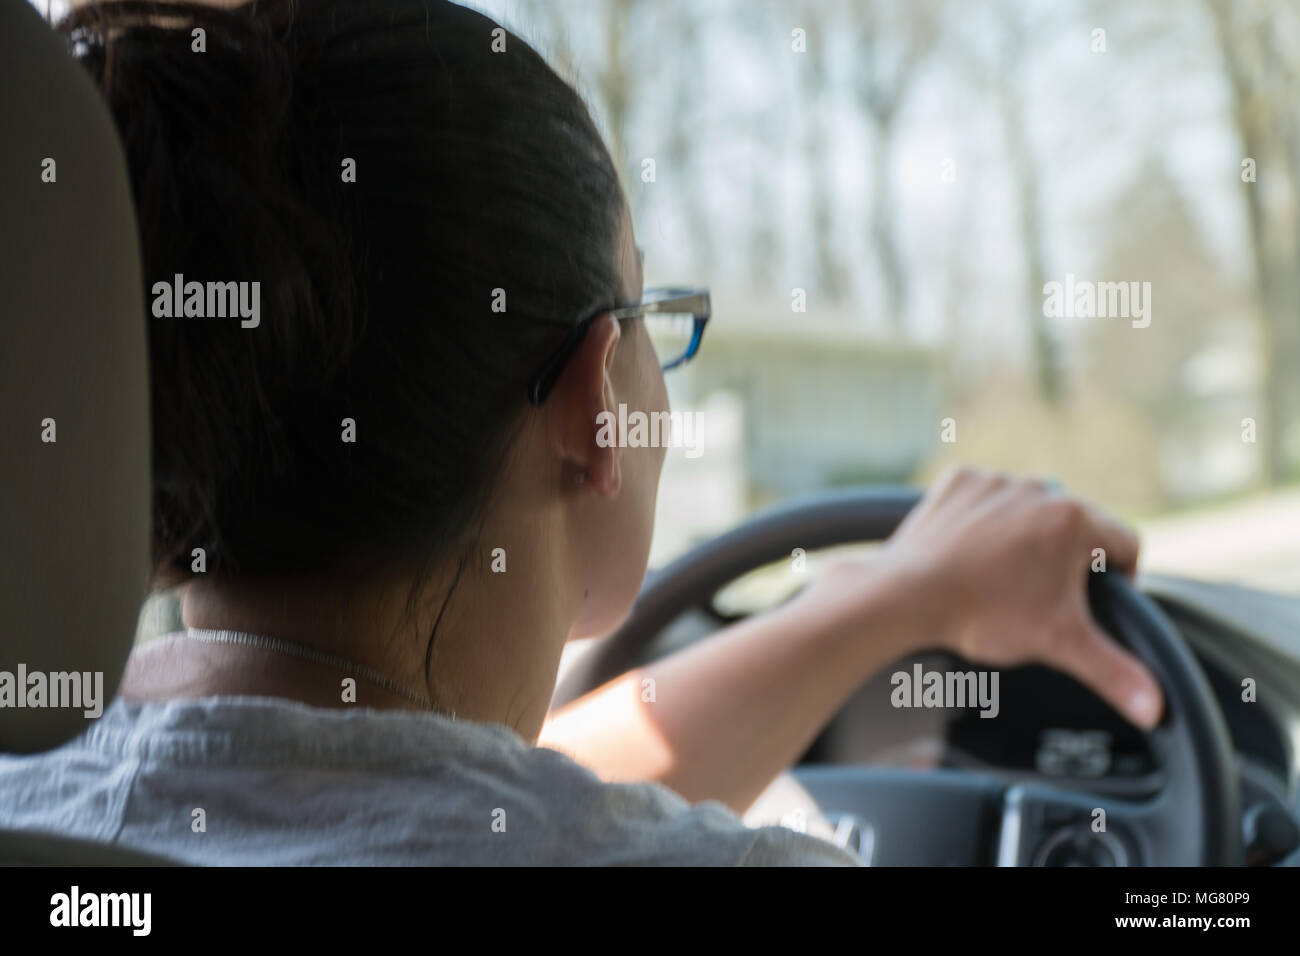 Over the shoulder POV teen girl driving a car on a rural road road during the day time. OTS. Stock Photo